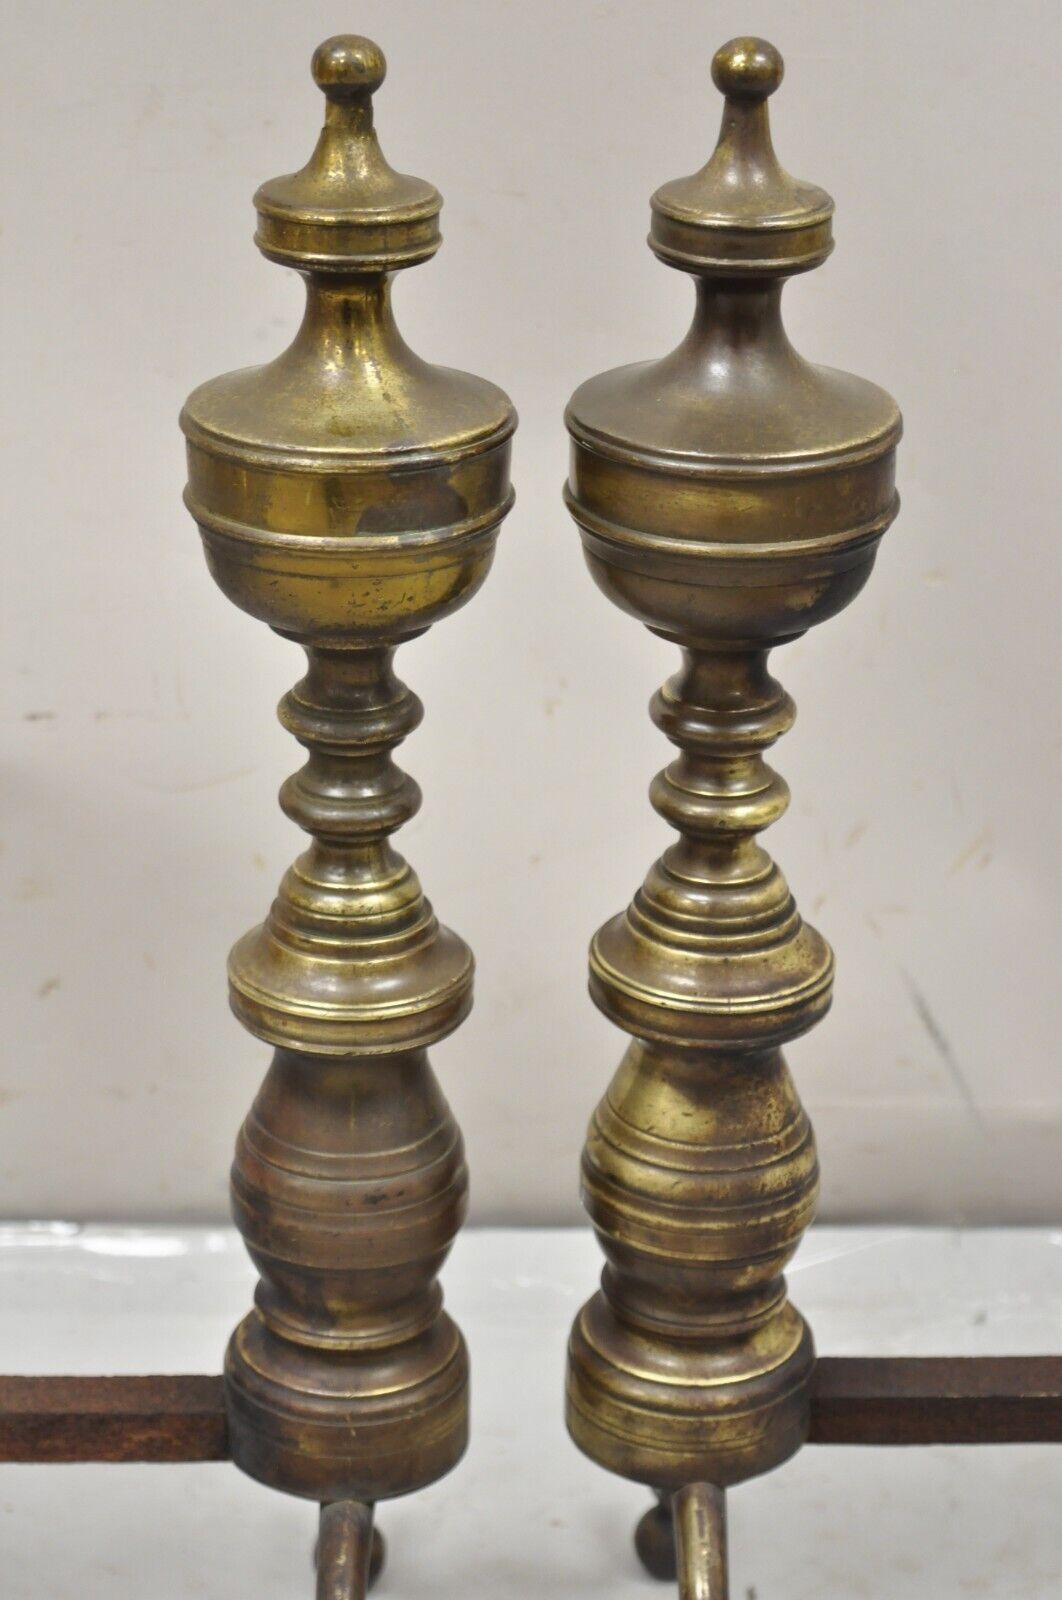 Antique Brass Federal Branch Leg Urn Finial Cast Iron Andirons - a Pair For Sale 8